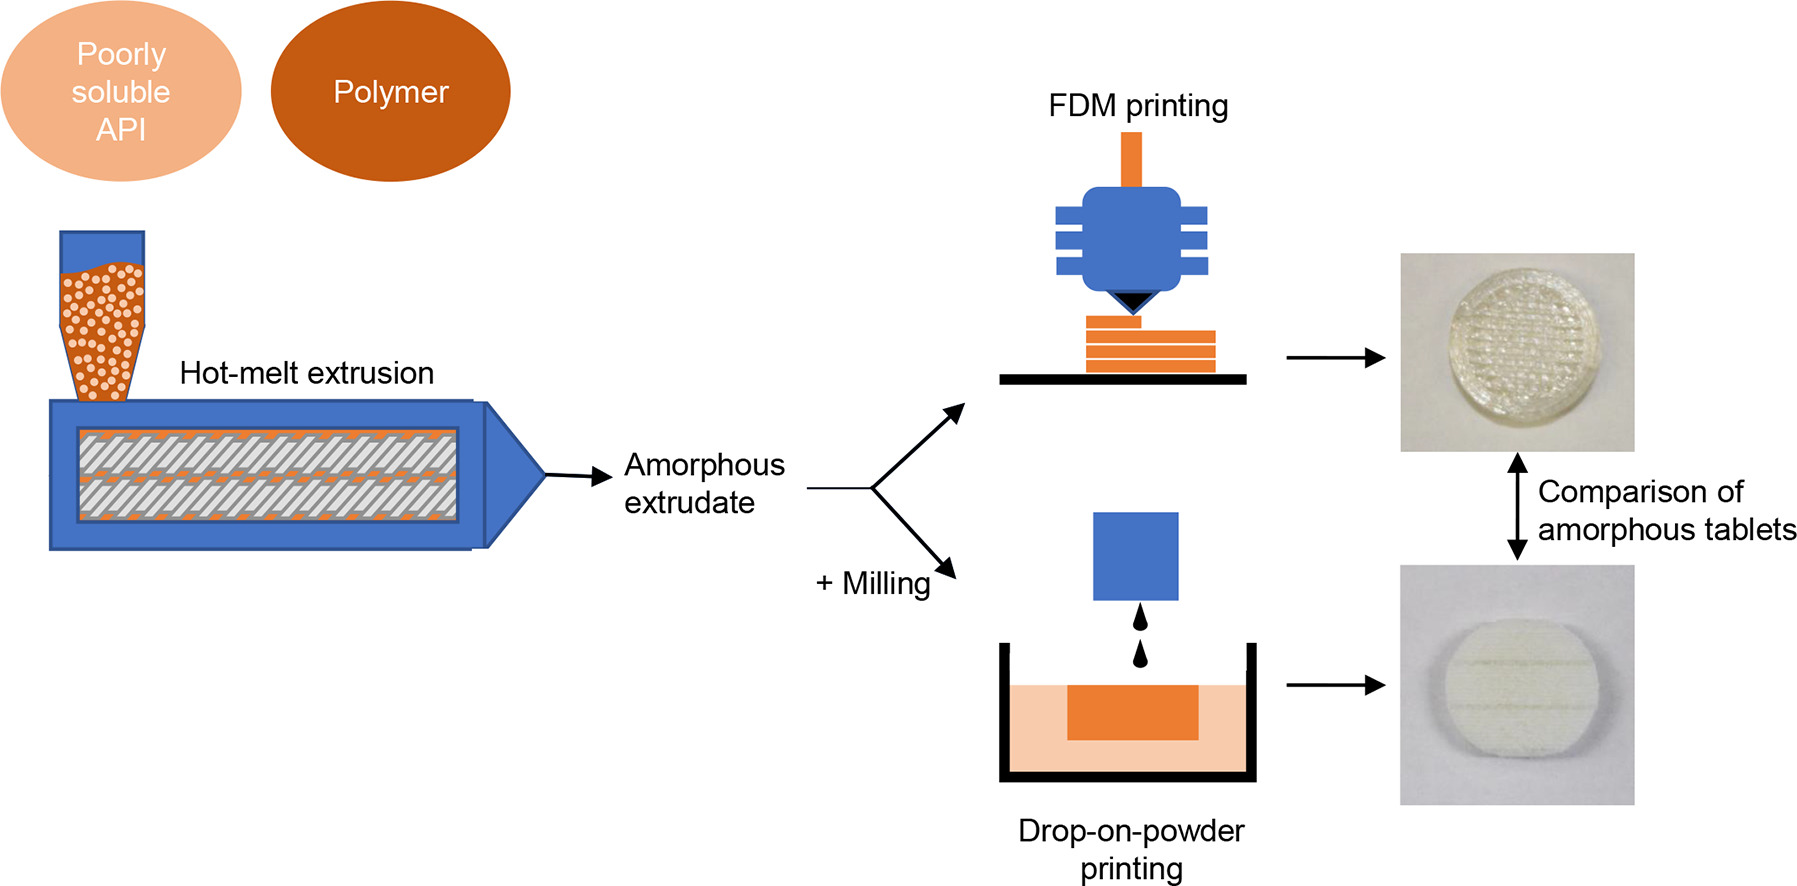 3D printing of amorphous solid dispersions: A comparison of fused  deposition modeling and drop-on-powder printing - Pharma Excipients